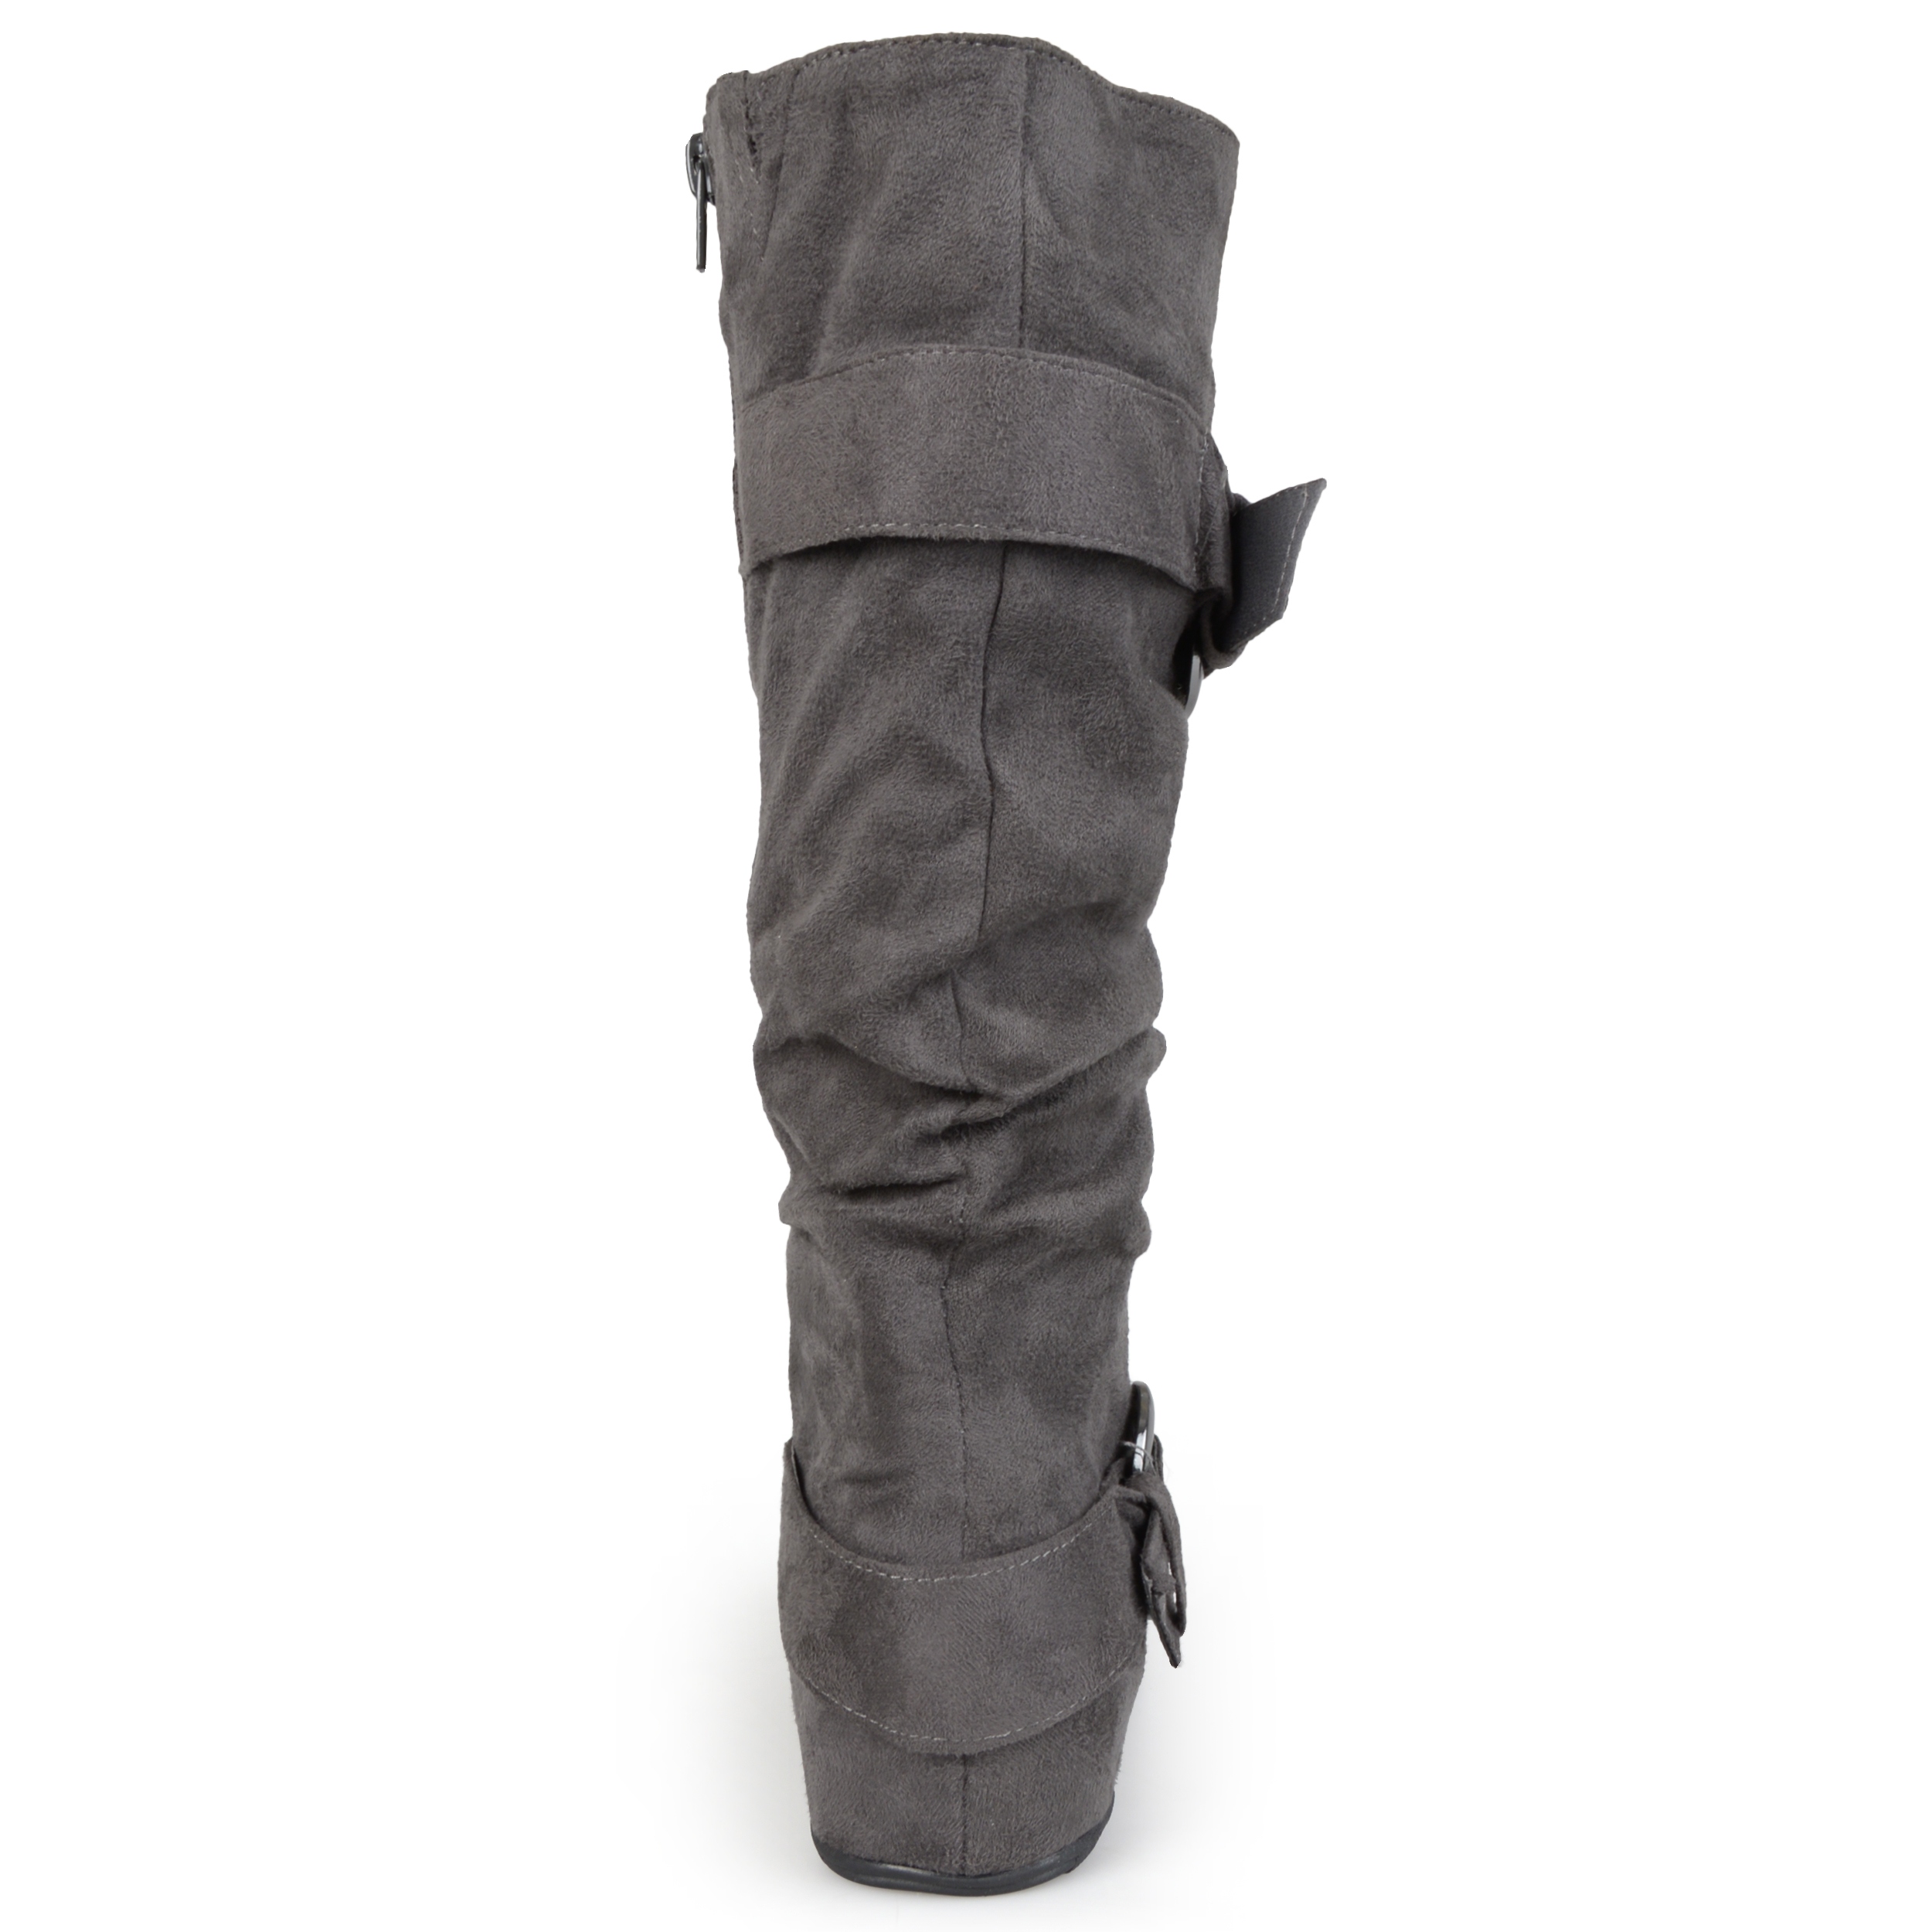 Brinley Co. Women's Extra Wide Calf Mid-Calf Slouch Riding Boots - image 4 of 8